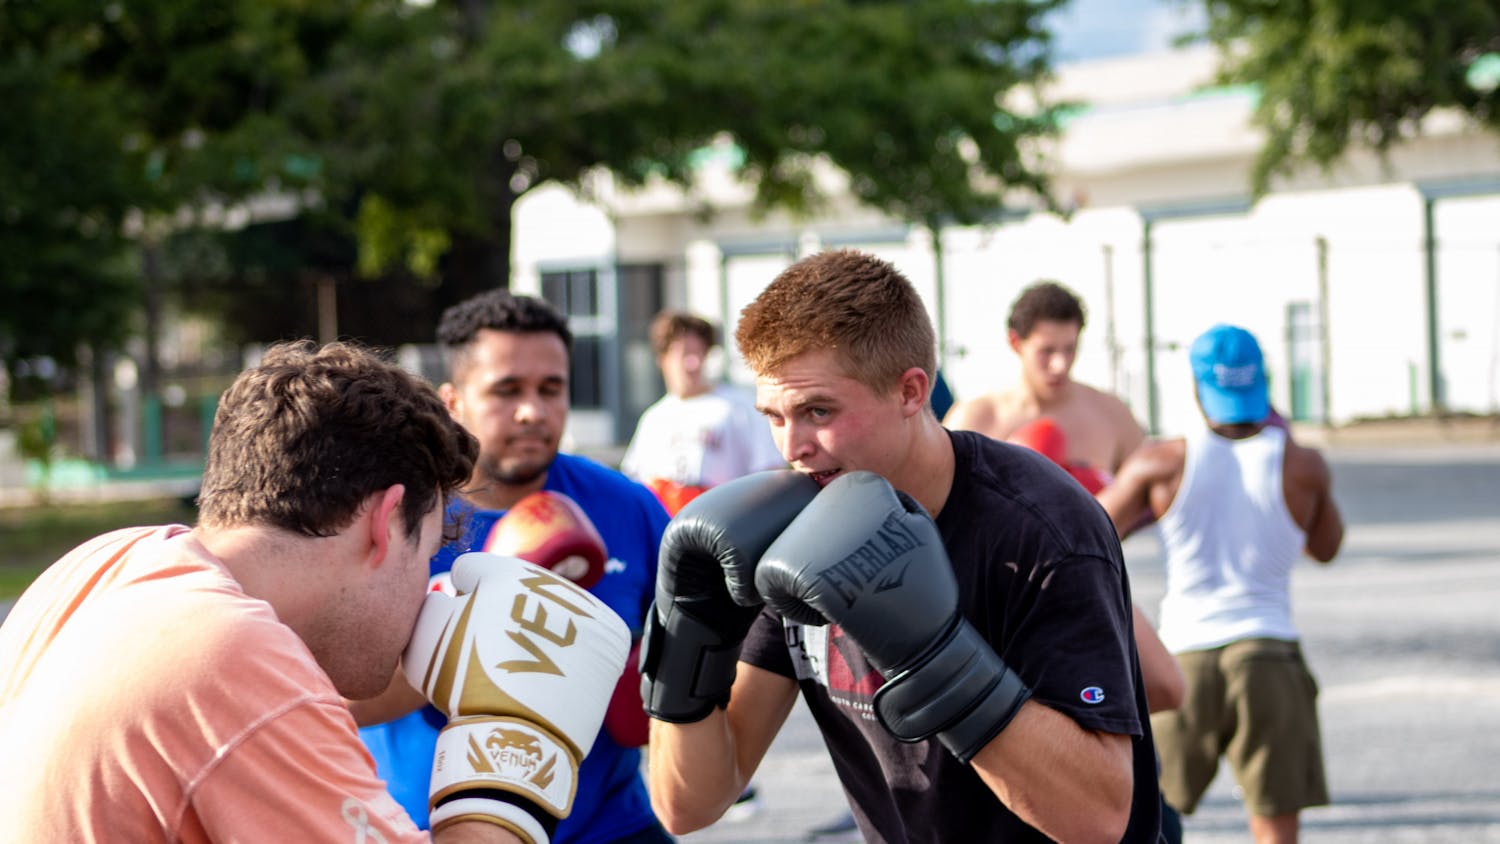 USC's Carolina Boxing Club gathers for an high-paced practice session on Sept. 12, 2022, at Battle Boxing Gym on Bluff Rd. in Columbia, S.C. The Carolina Boxing Club practices Monday, Wednesday and Friday afternoons for a variety of training sessions to prepare members for live-sparring sessions and tournaments taking place later this season.